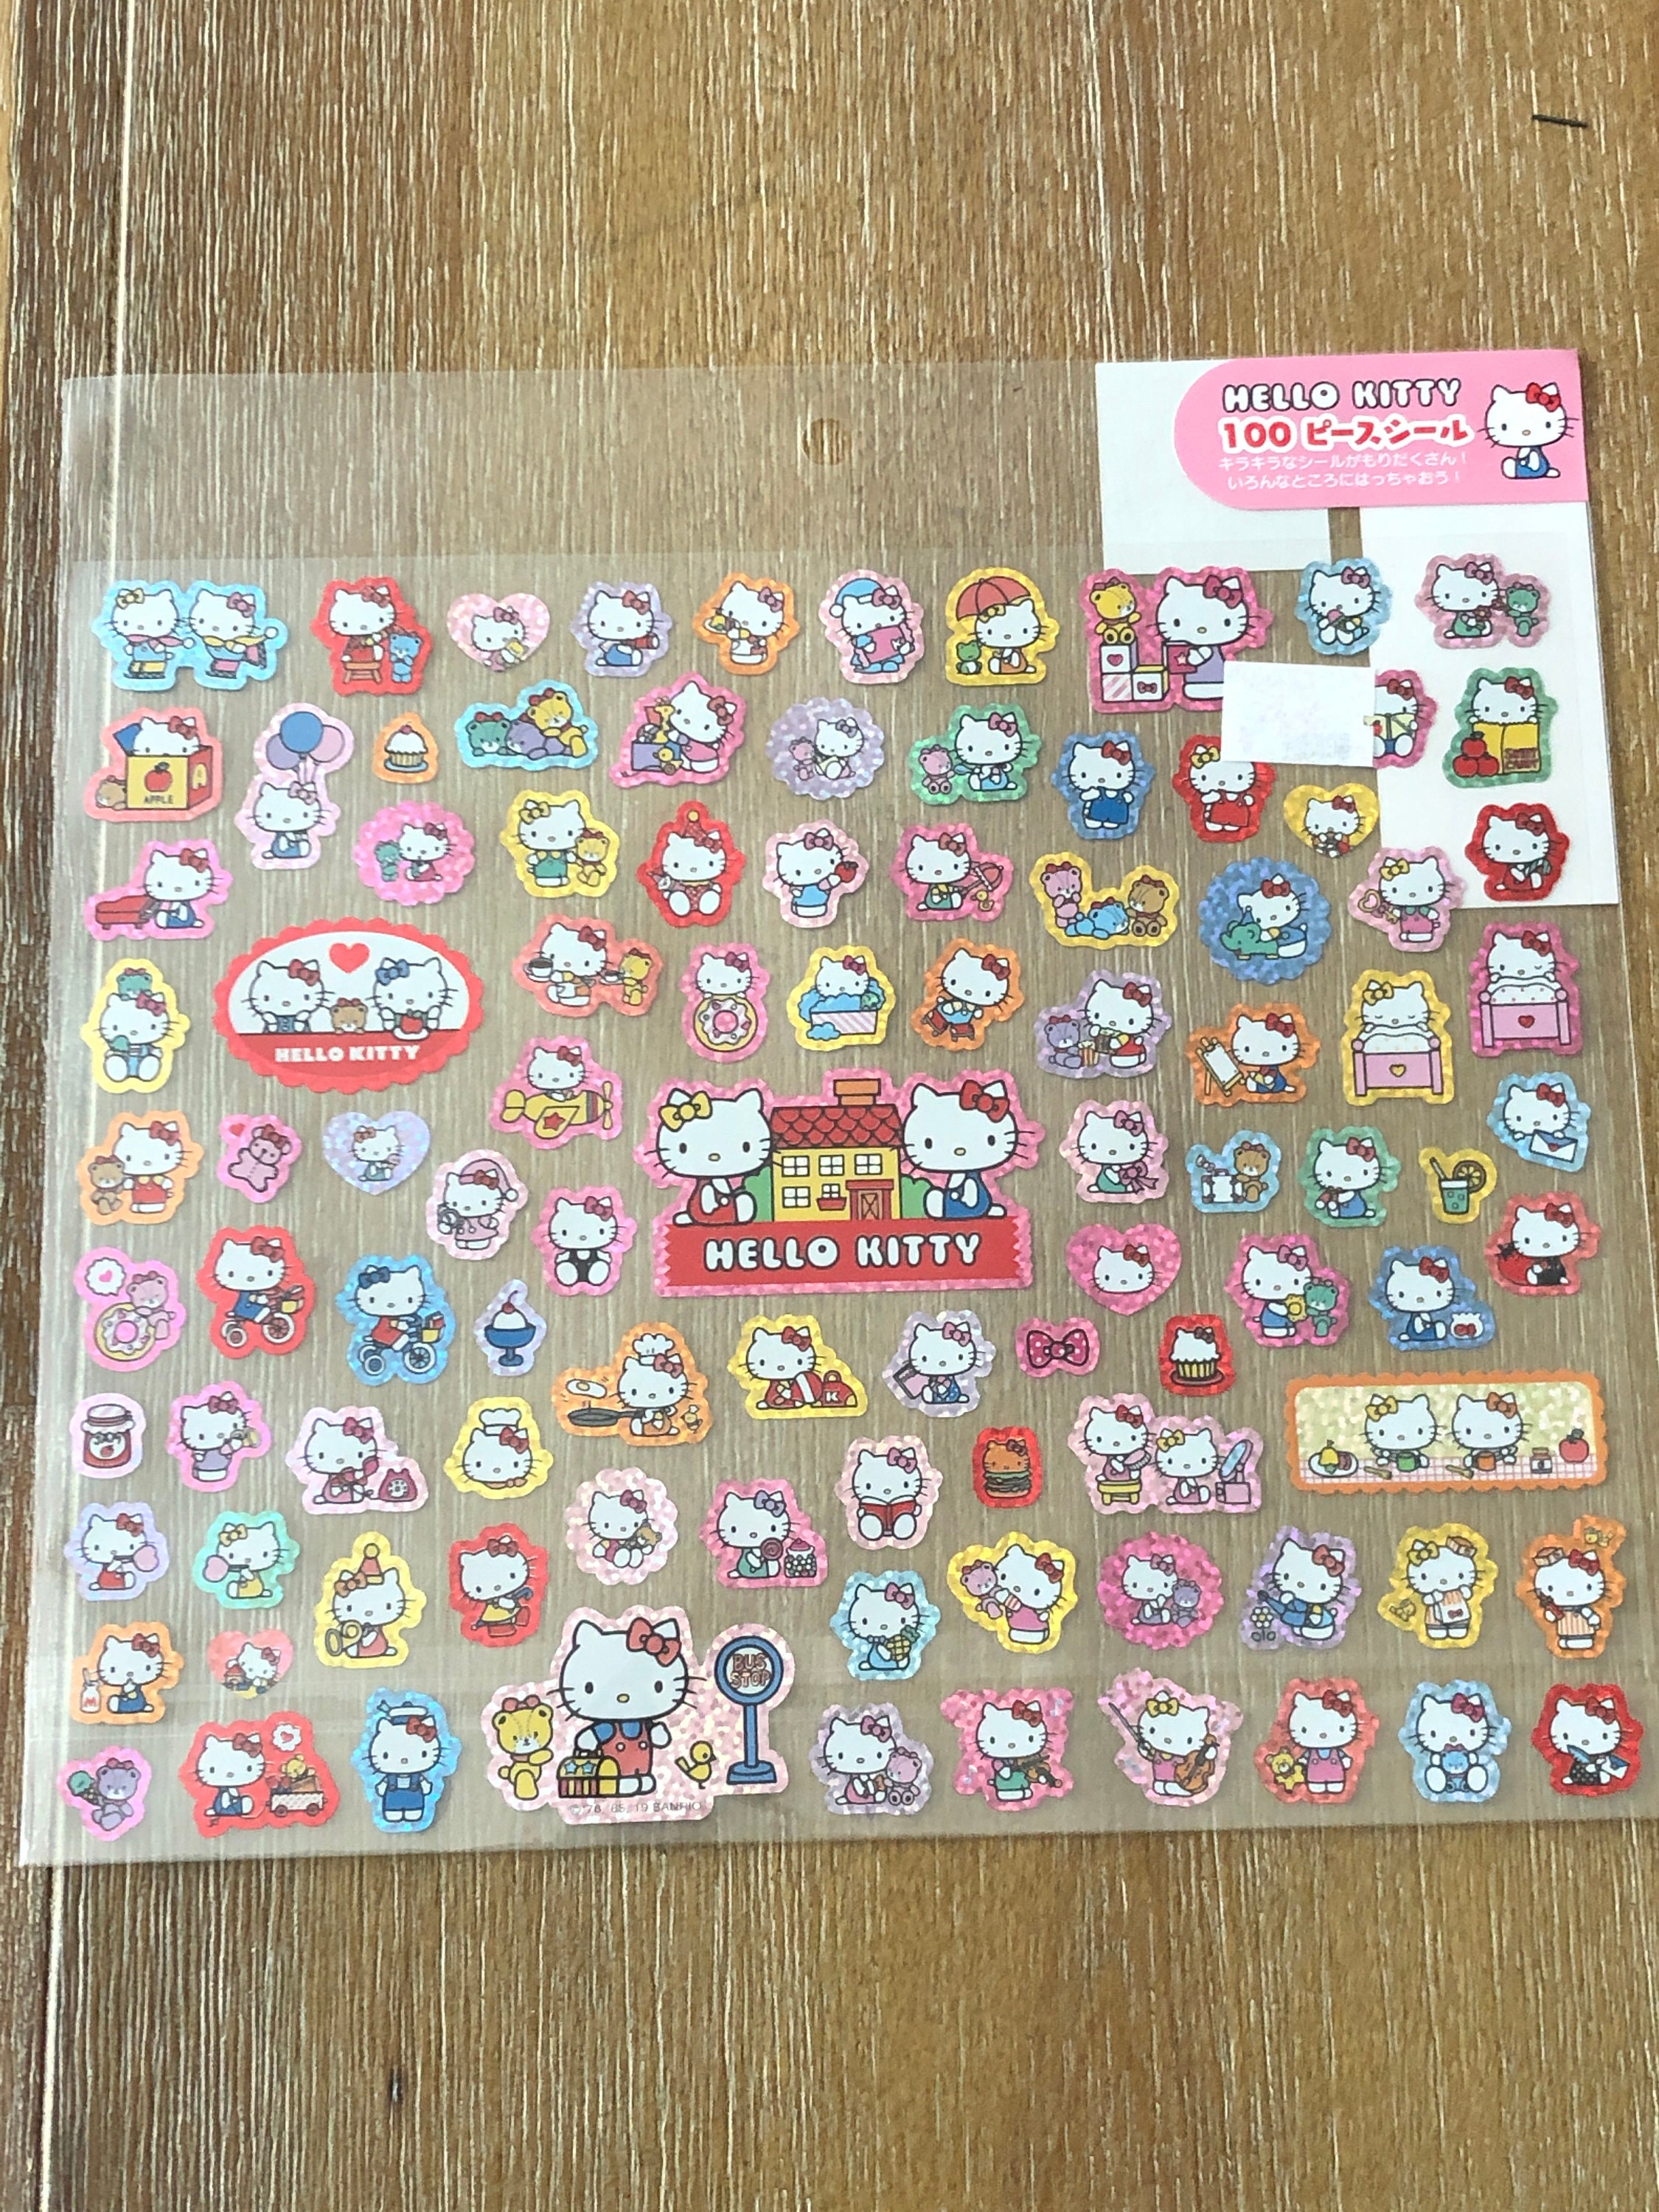 NEW Hello Kitty Sticker Tote with 3 Sheets of Stickers 